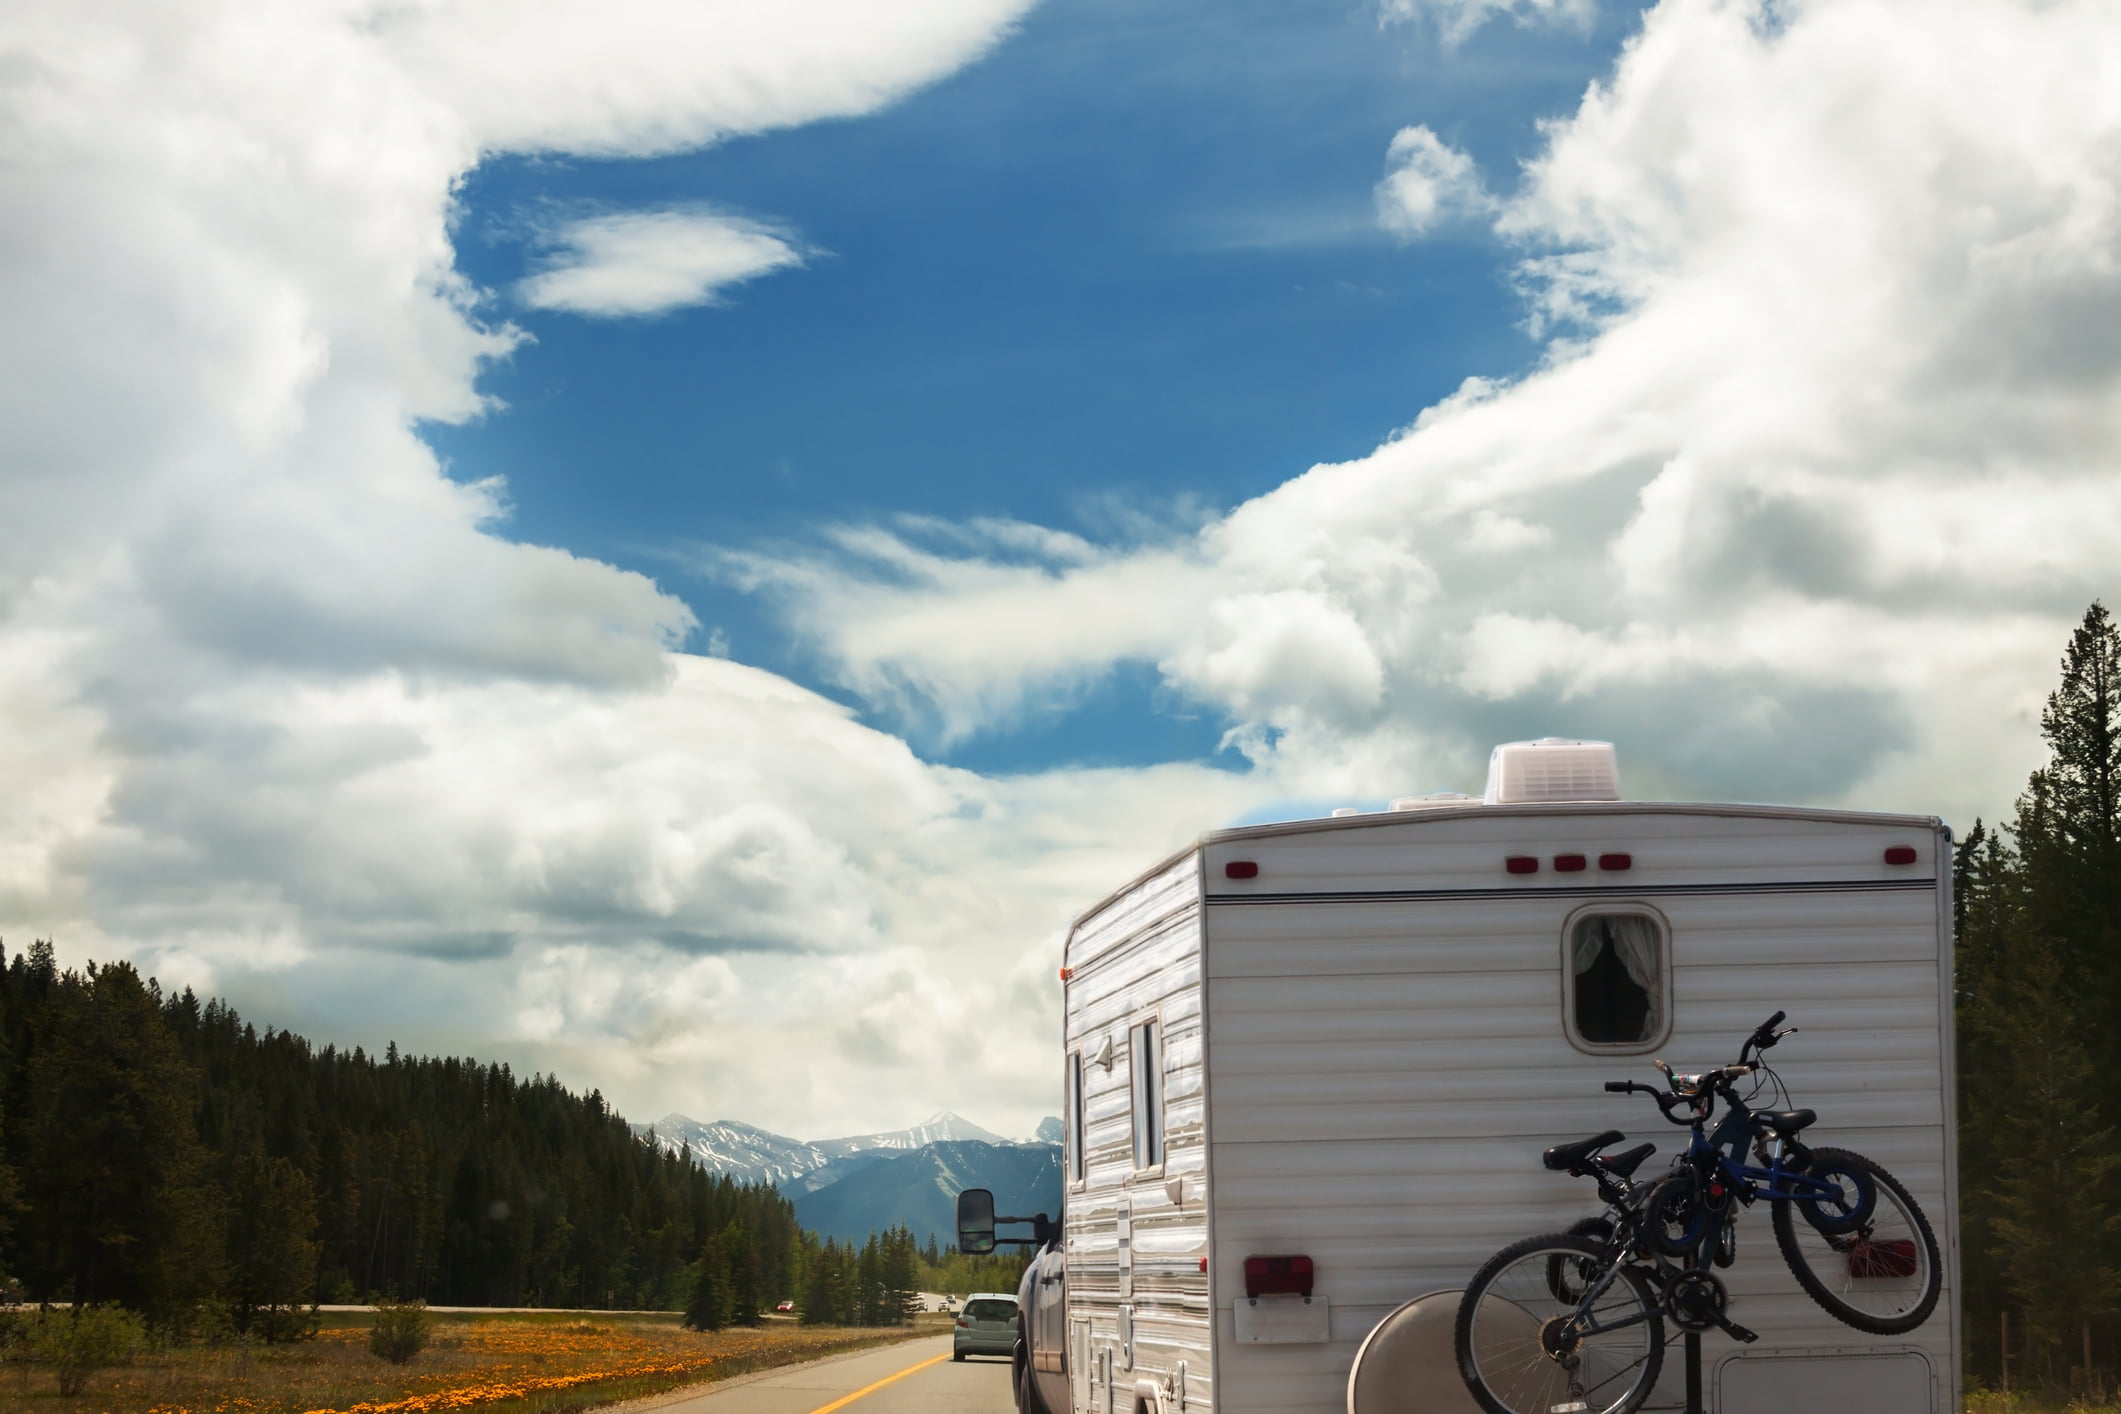 An RV driving on the road with mountains in the distance.